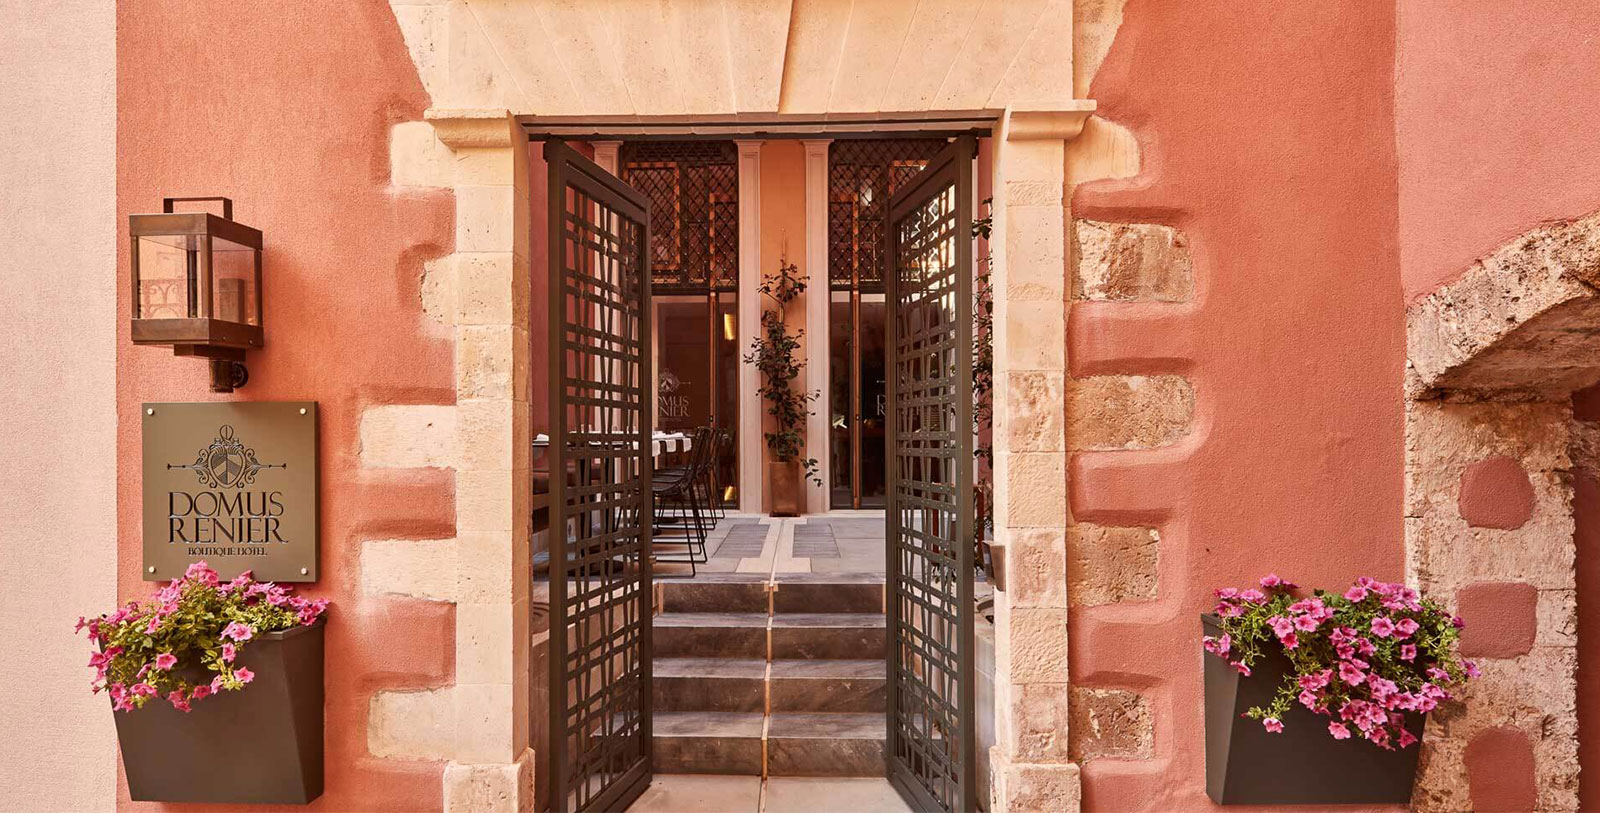 Image of hotel exterior Domus Renier Boutique Hotel, 1608, Member of Historic Hotels Worldwide, in Chania, Greece, Overview